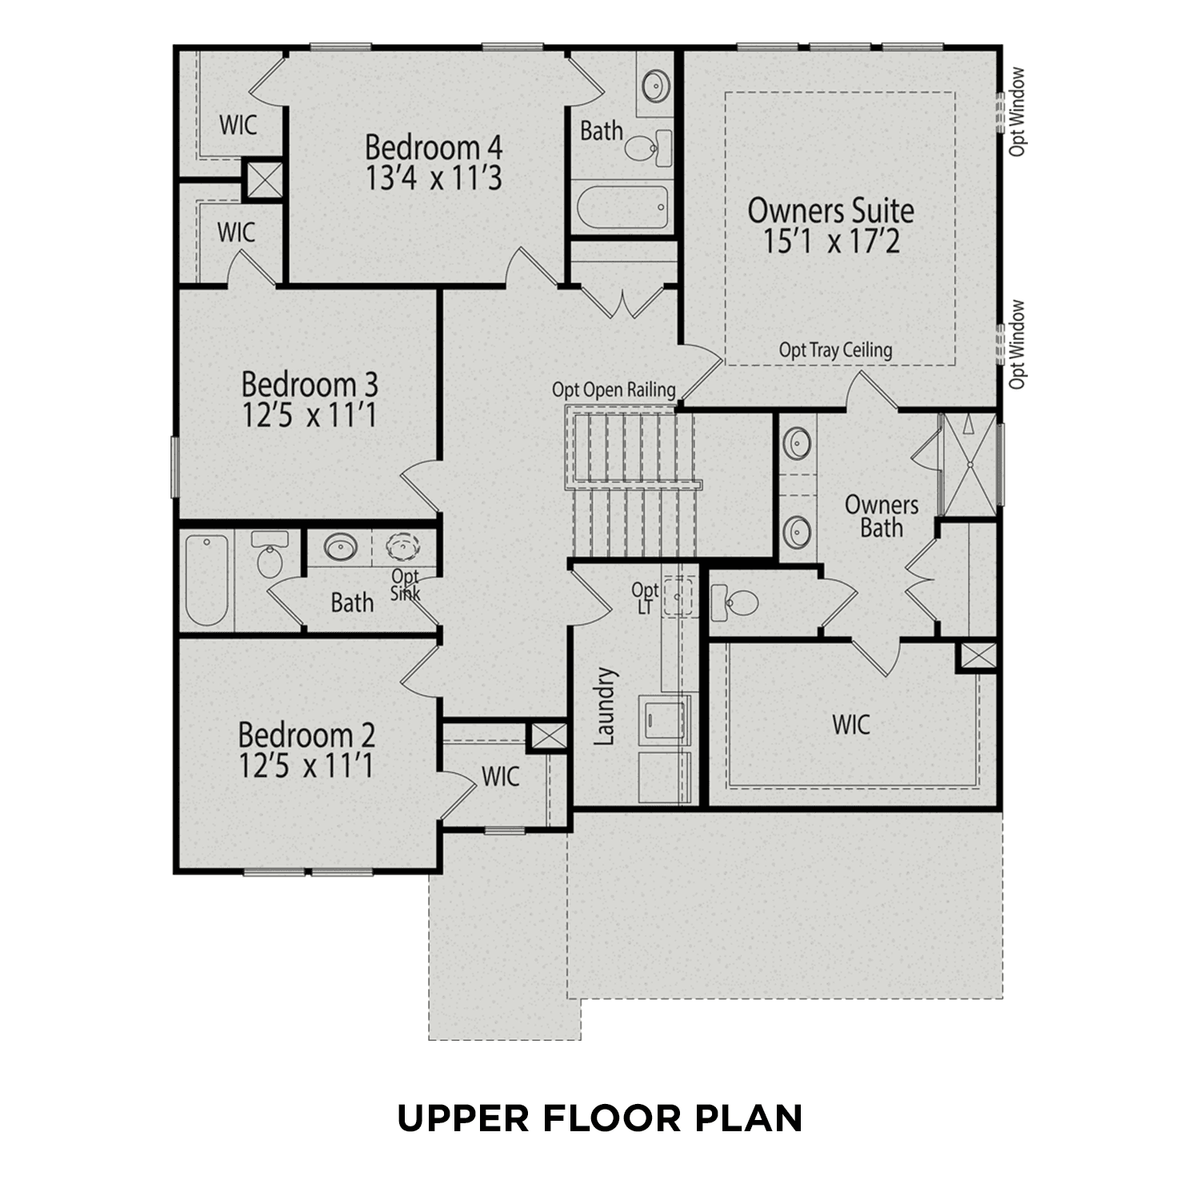 2 - The Hickory F floor plan layout for 612 Craftsman Ridge Trail in Davidson Homes' Glenmere community.